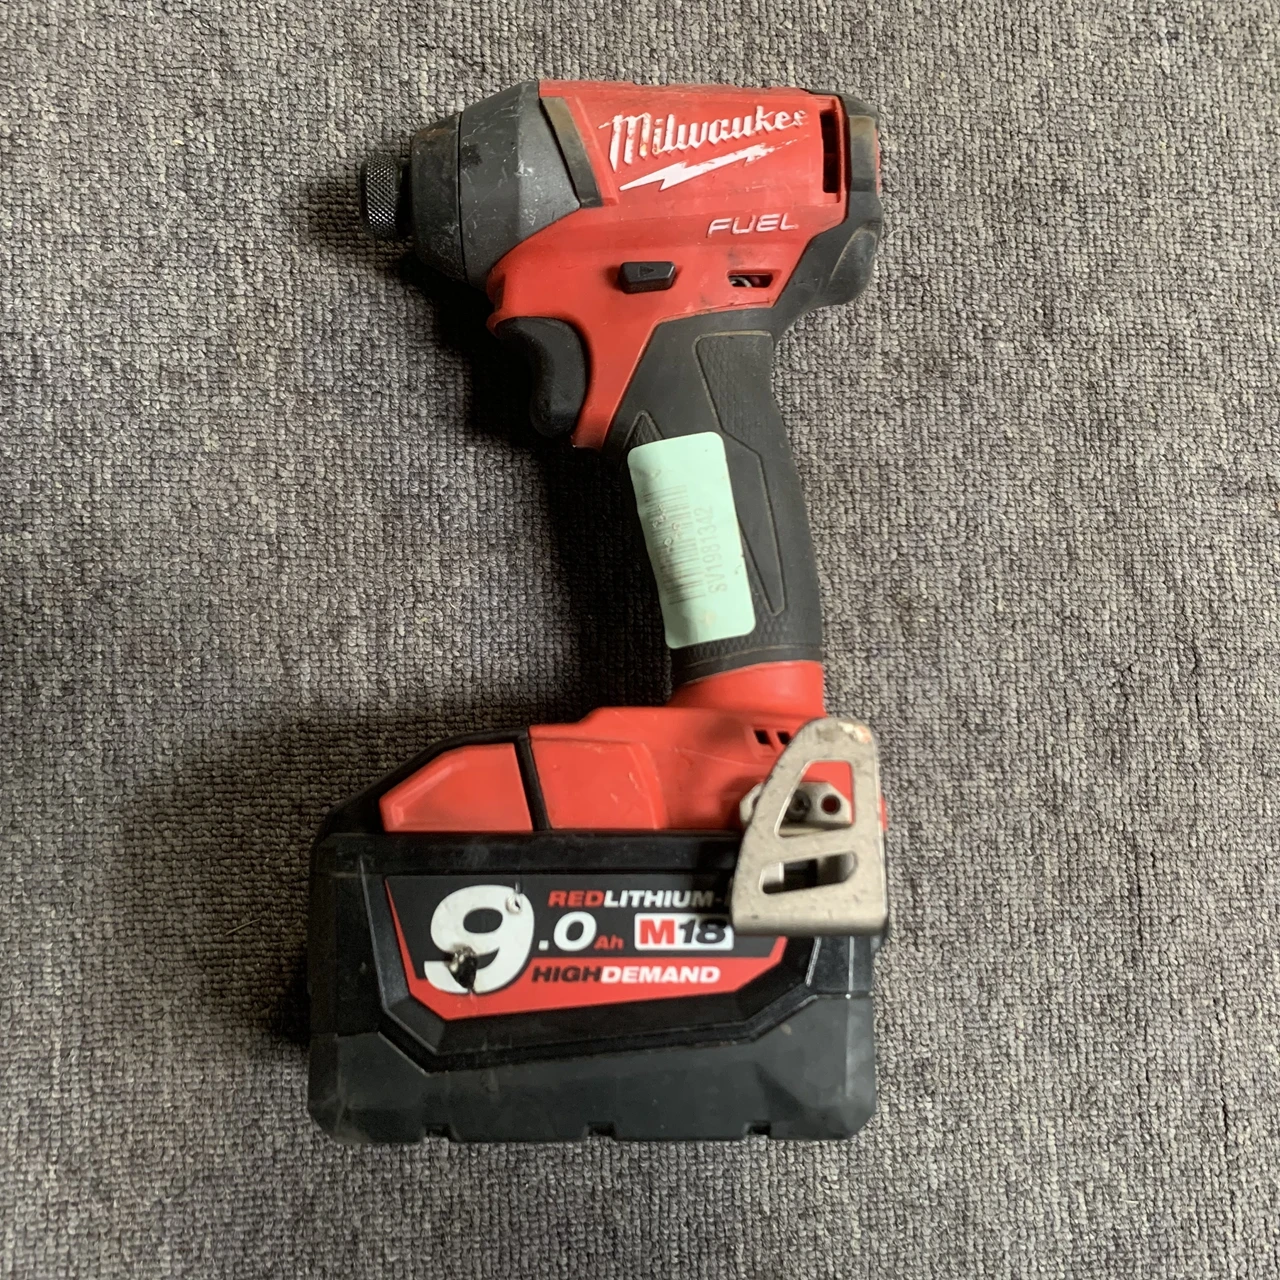 

Milwaukee 2753-20 M18 18V Brushless Cordless Hex Impact Driver Includes 9.0AH battery second-hand